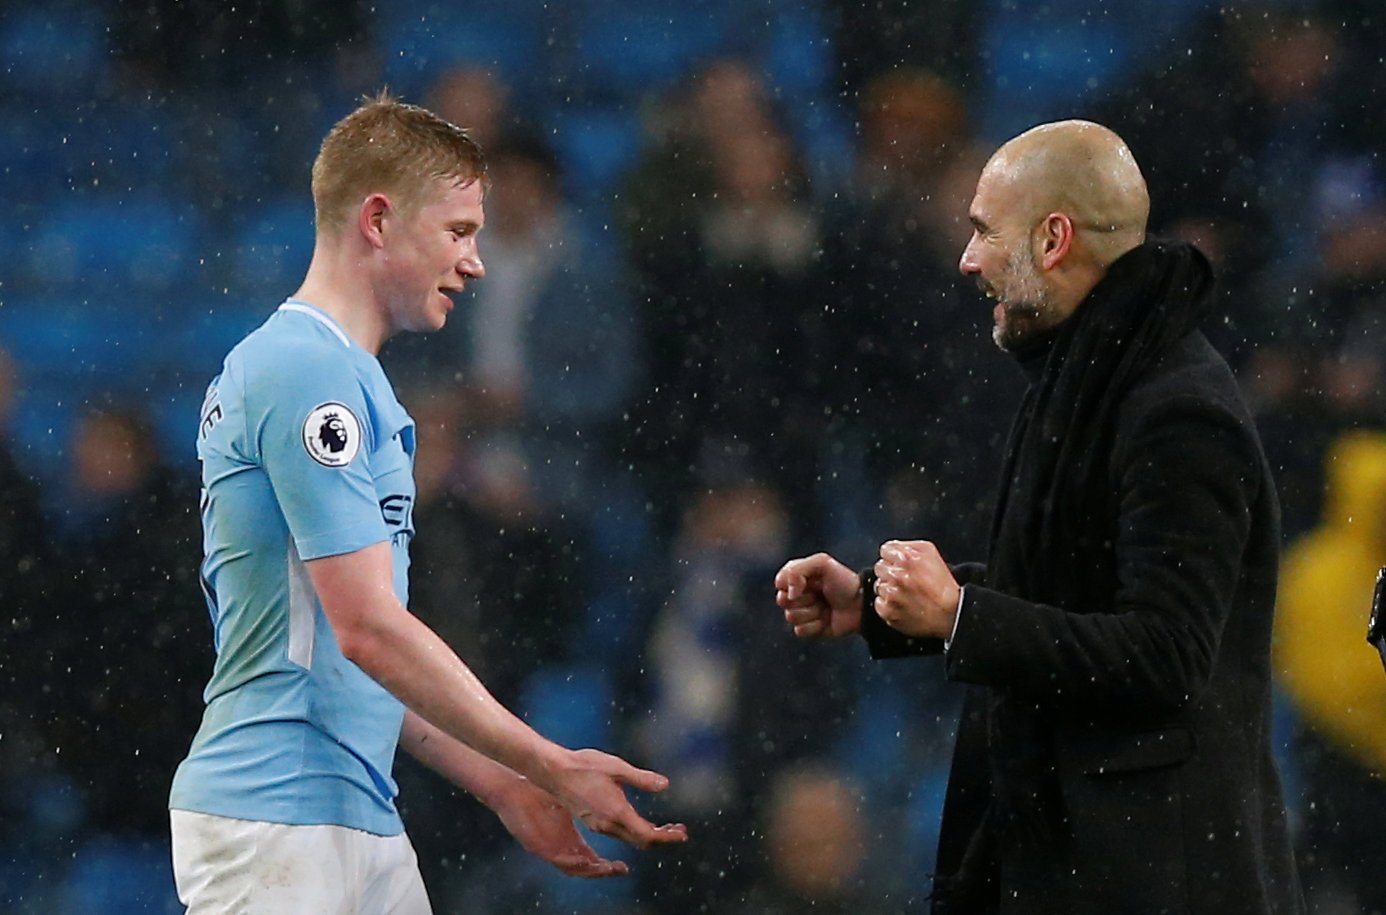 Kevin De Bruyne is one of the Most Valuable Players in World Football for 2018